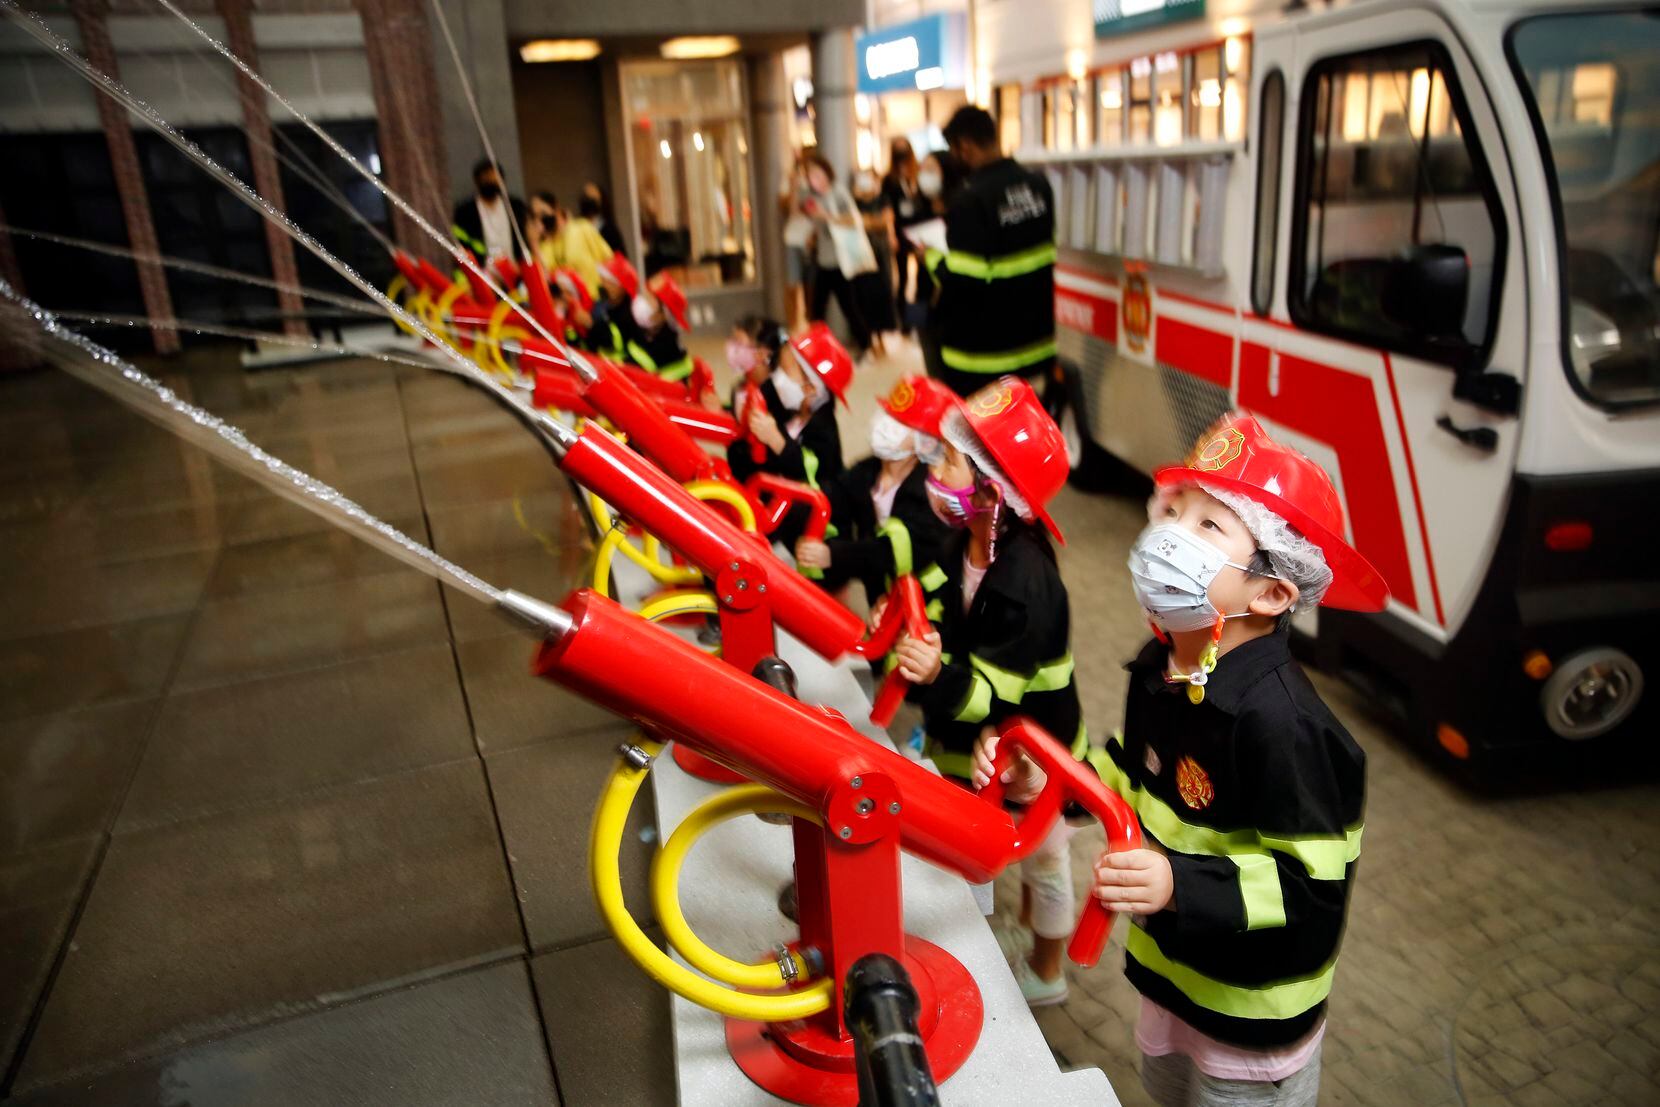 Little ones dressed as firefighters spray water hoses on the 'burning' FlameZ match factory...